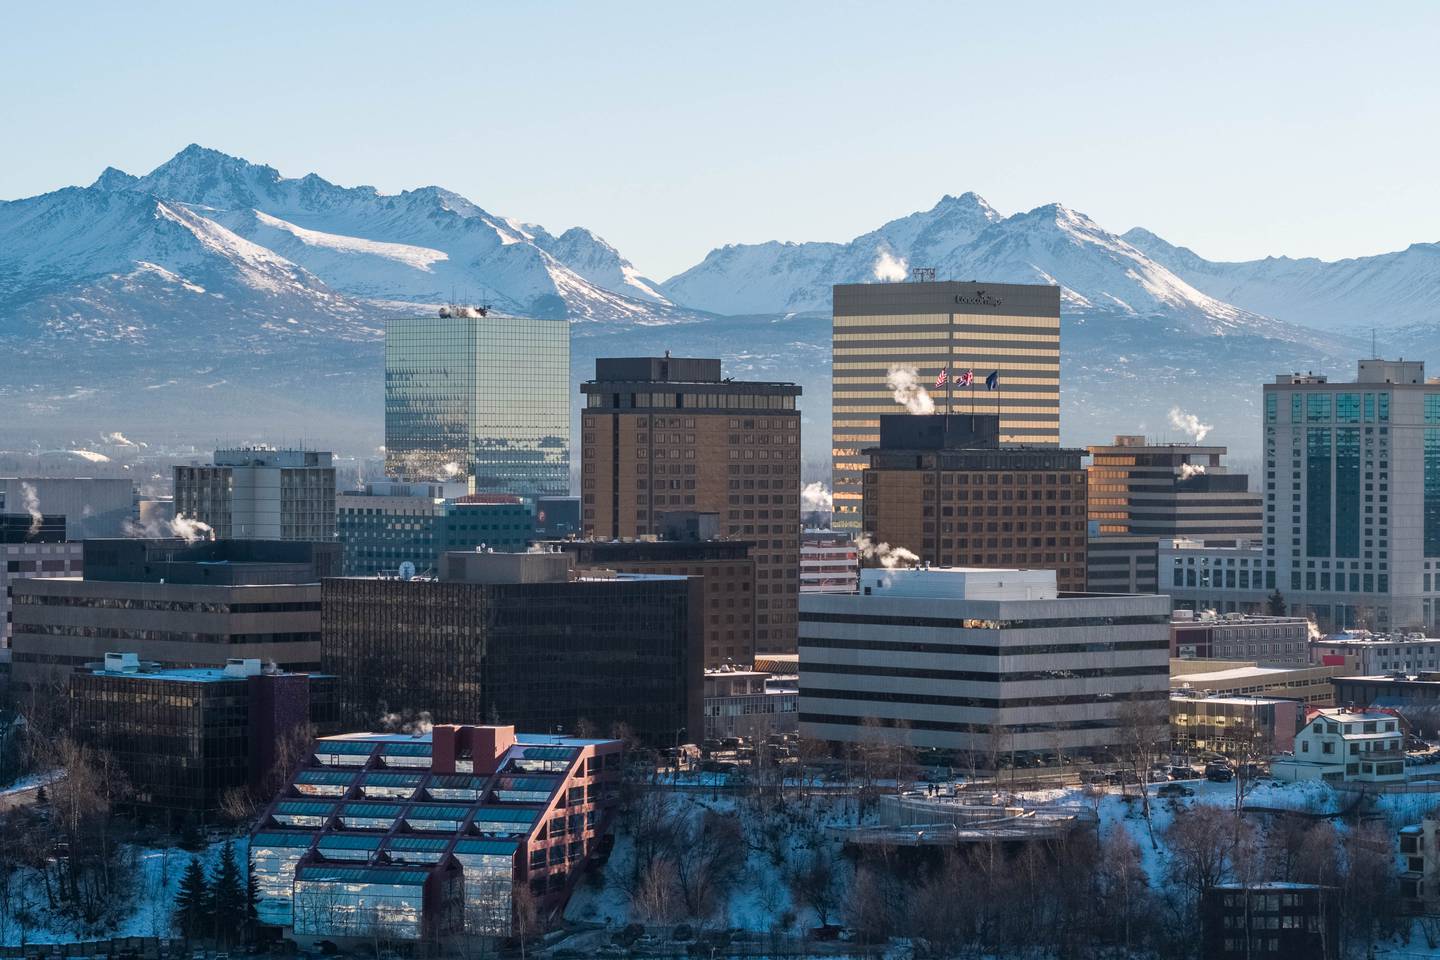 Downtown Anchorage is on the verge of a renaissance, thanks to this new